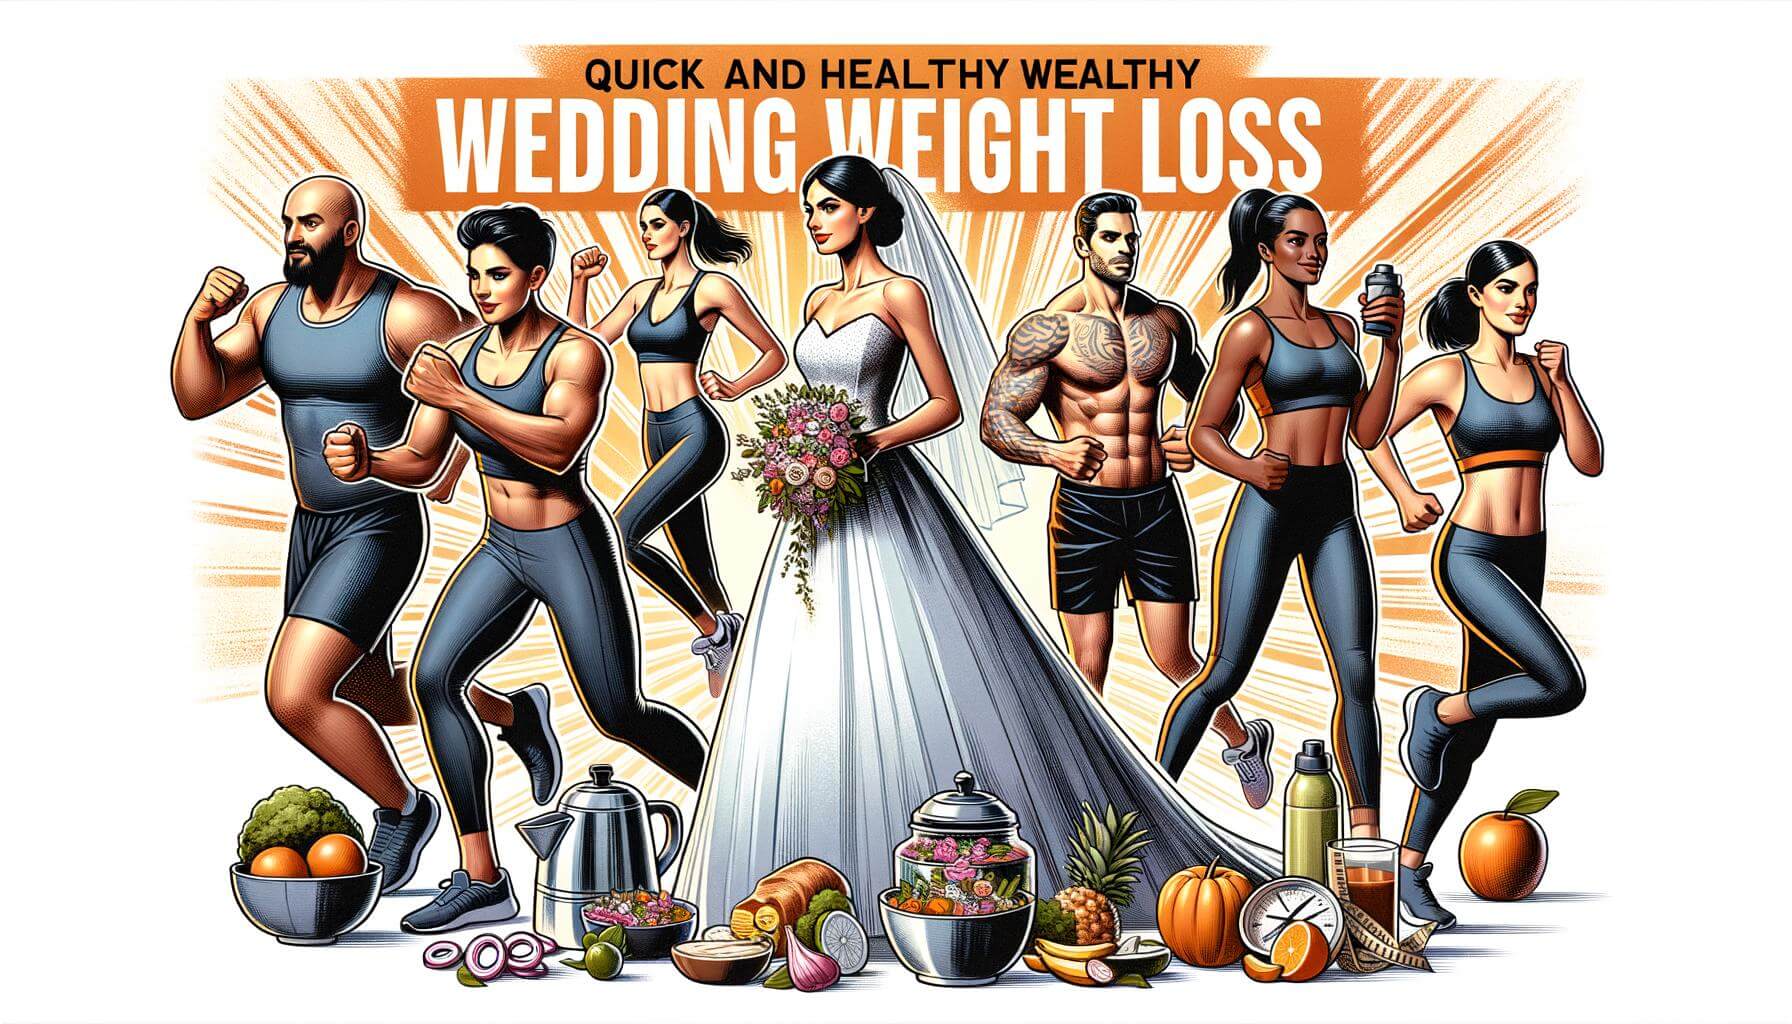 Quick and Healthy Wedding Weight Loss Strategies